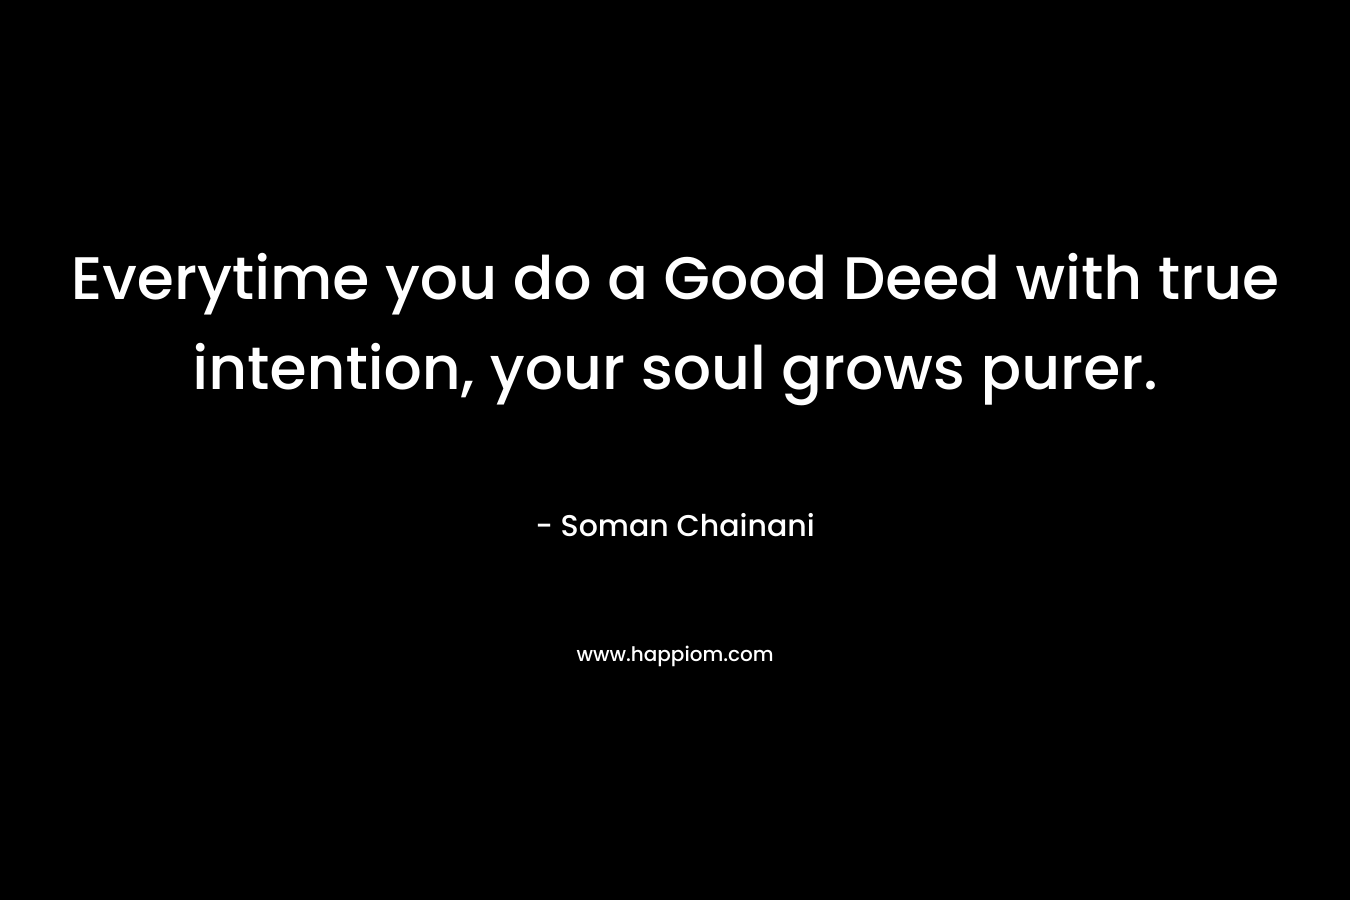 Everytime you do a Good Deed with true intention, your soul grows purer. – Soman Chainani